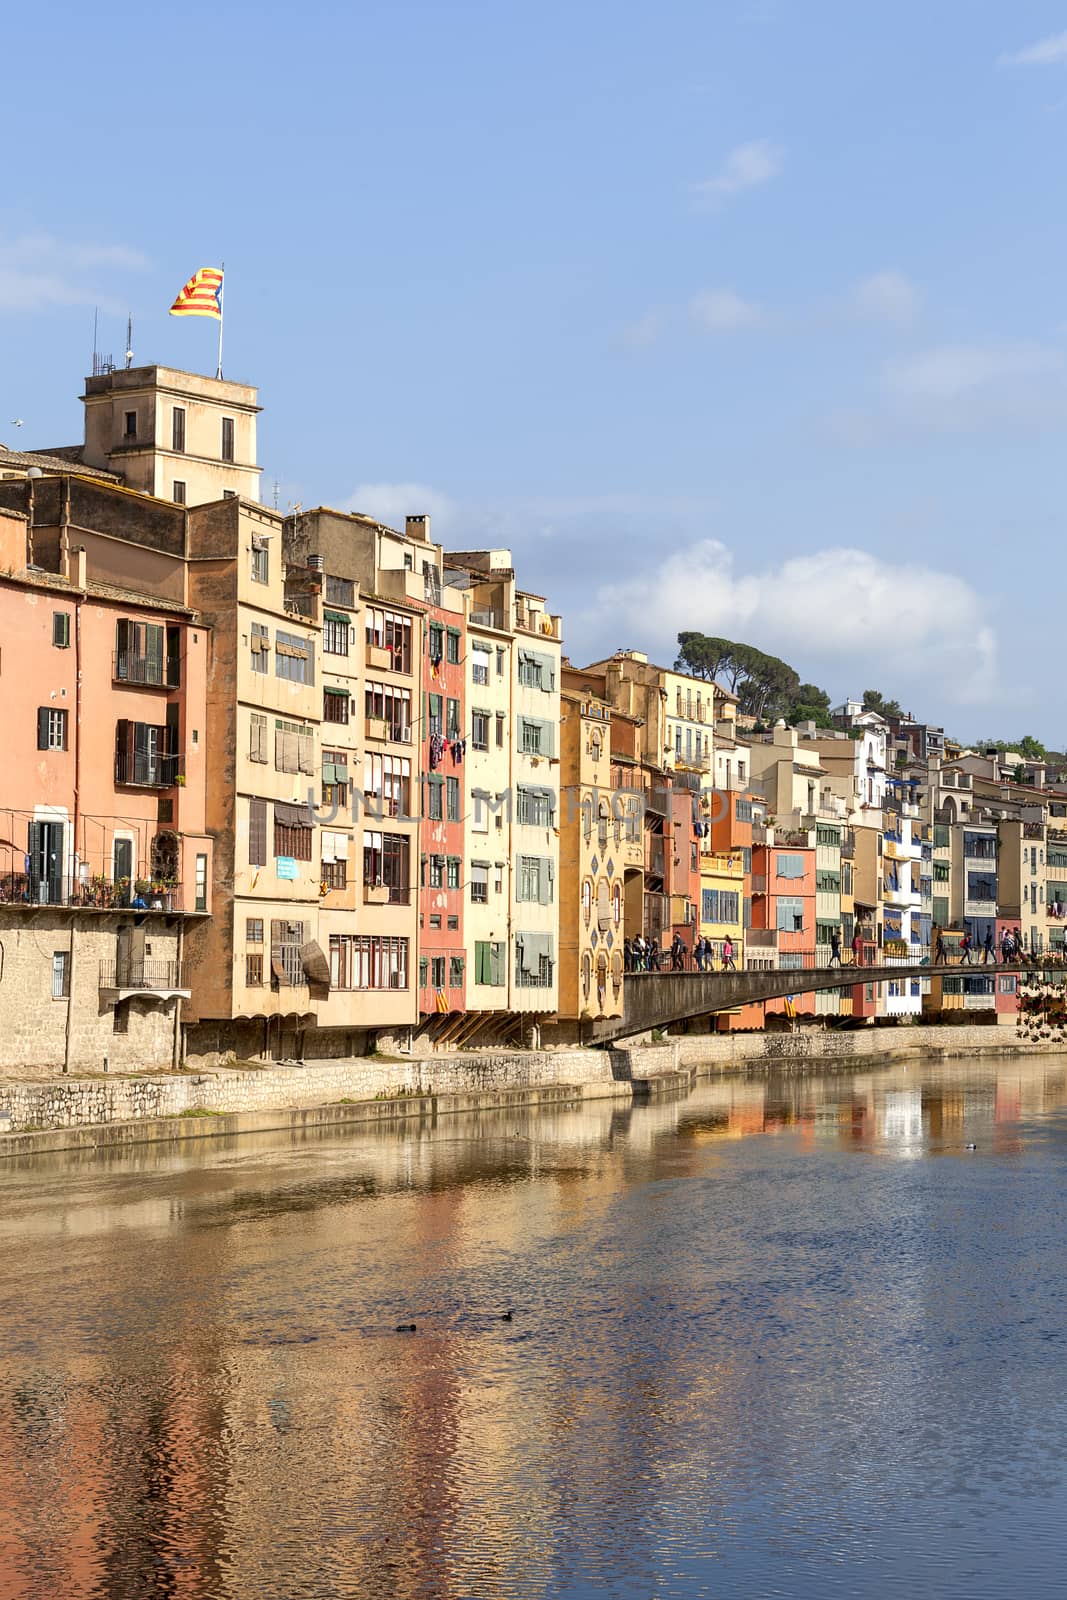 GIRONA, SPAIN - MAY 15, 2016 :Colorful houses on the river Onyar and tourists on the Princess Bridge.  Girona is one of the major Catalan cities.It has one of the largest historical Jewish quarters in Europe.